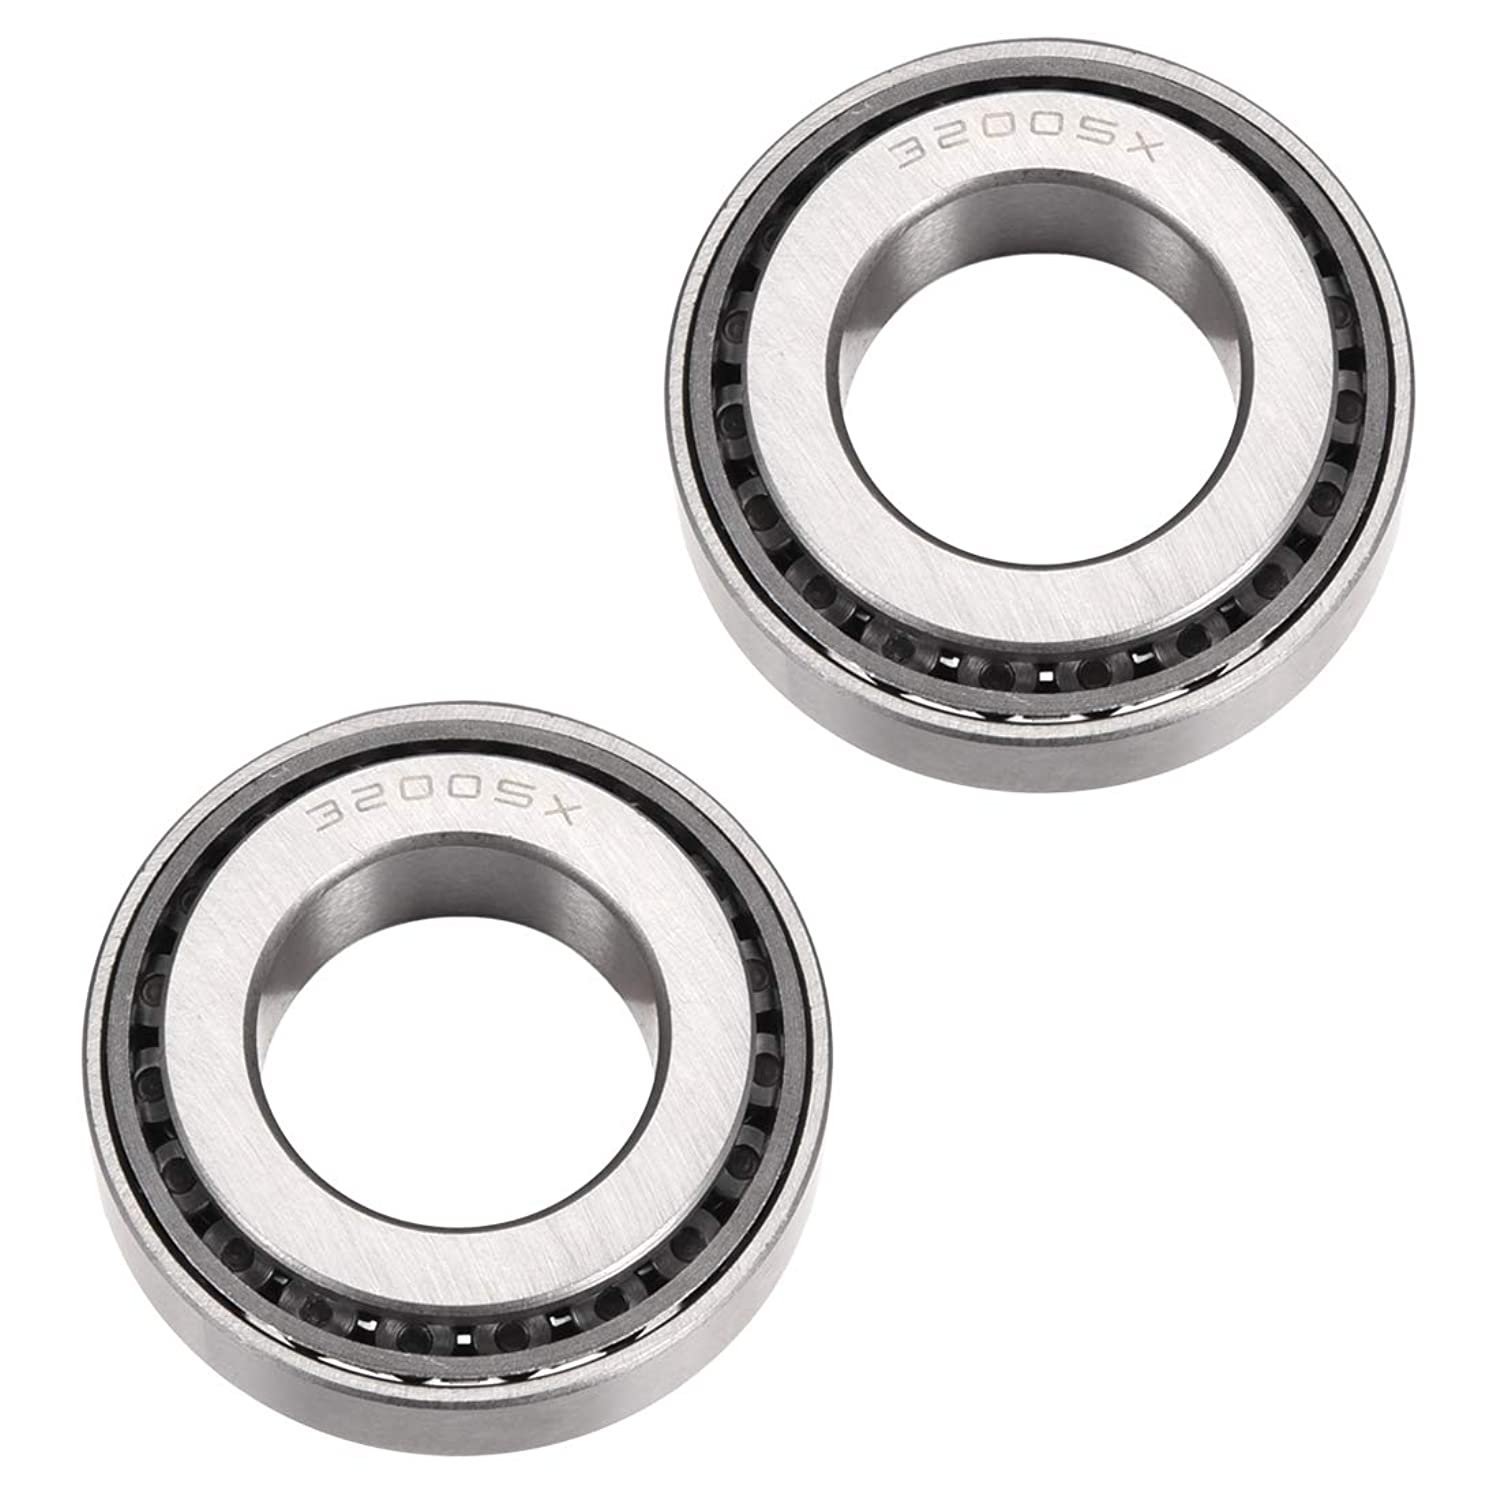 uxcell 32005X Tapered Roller Bearing Cone and Cup Set, 25mm Bore 47mm OD 15mm Thickness 2